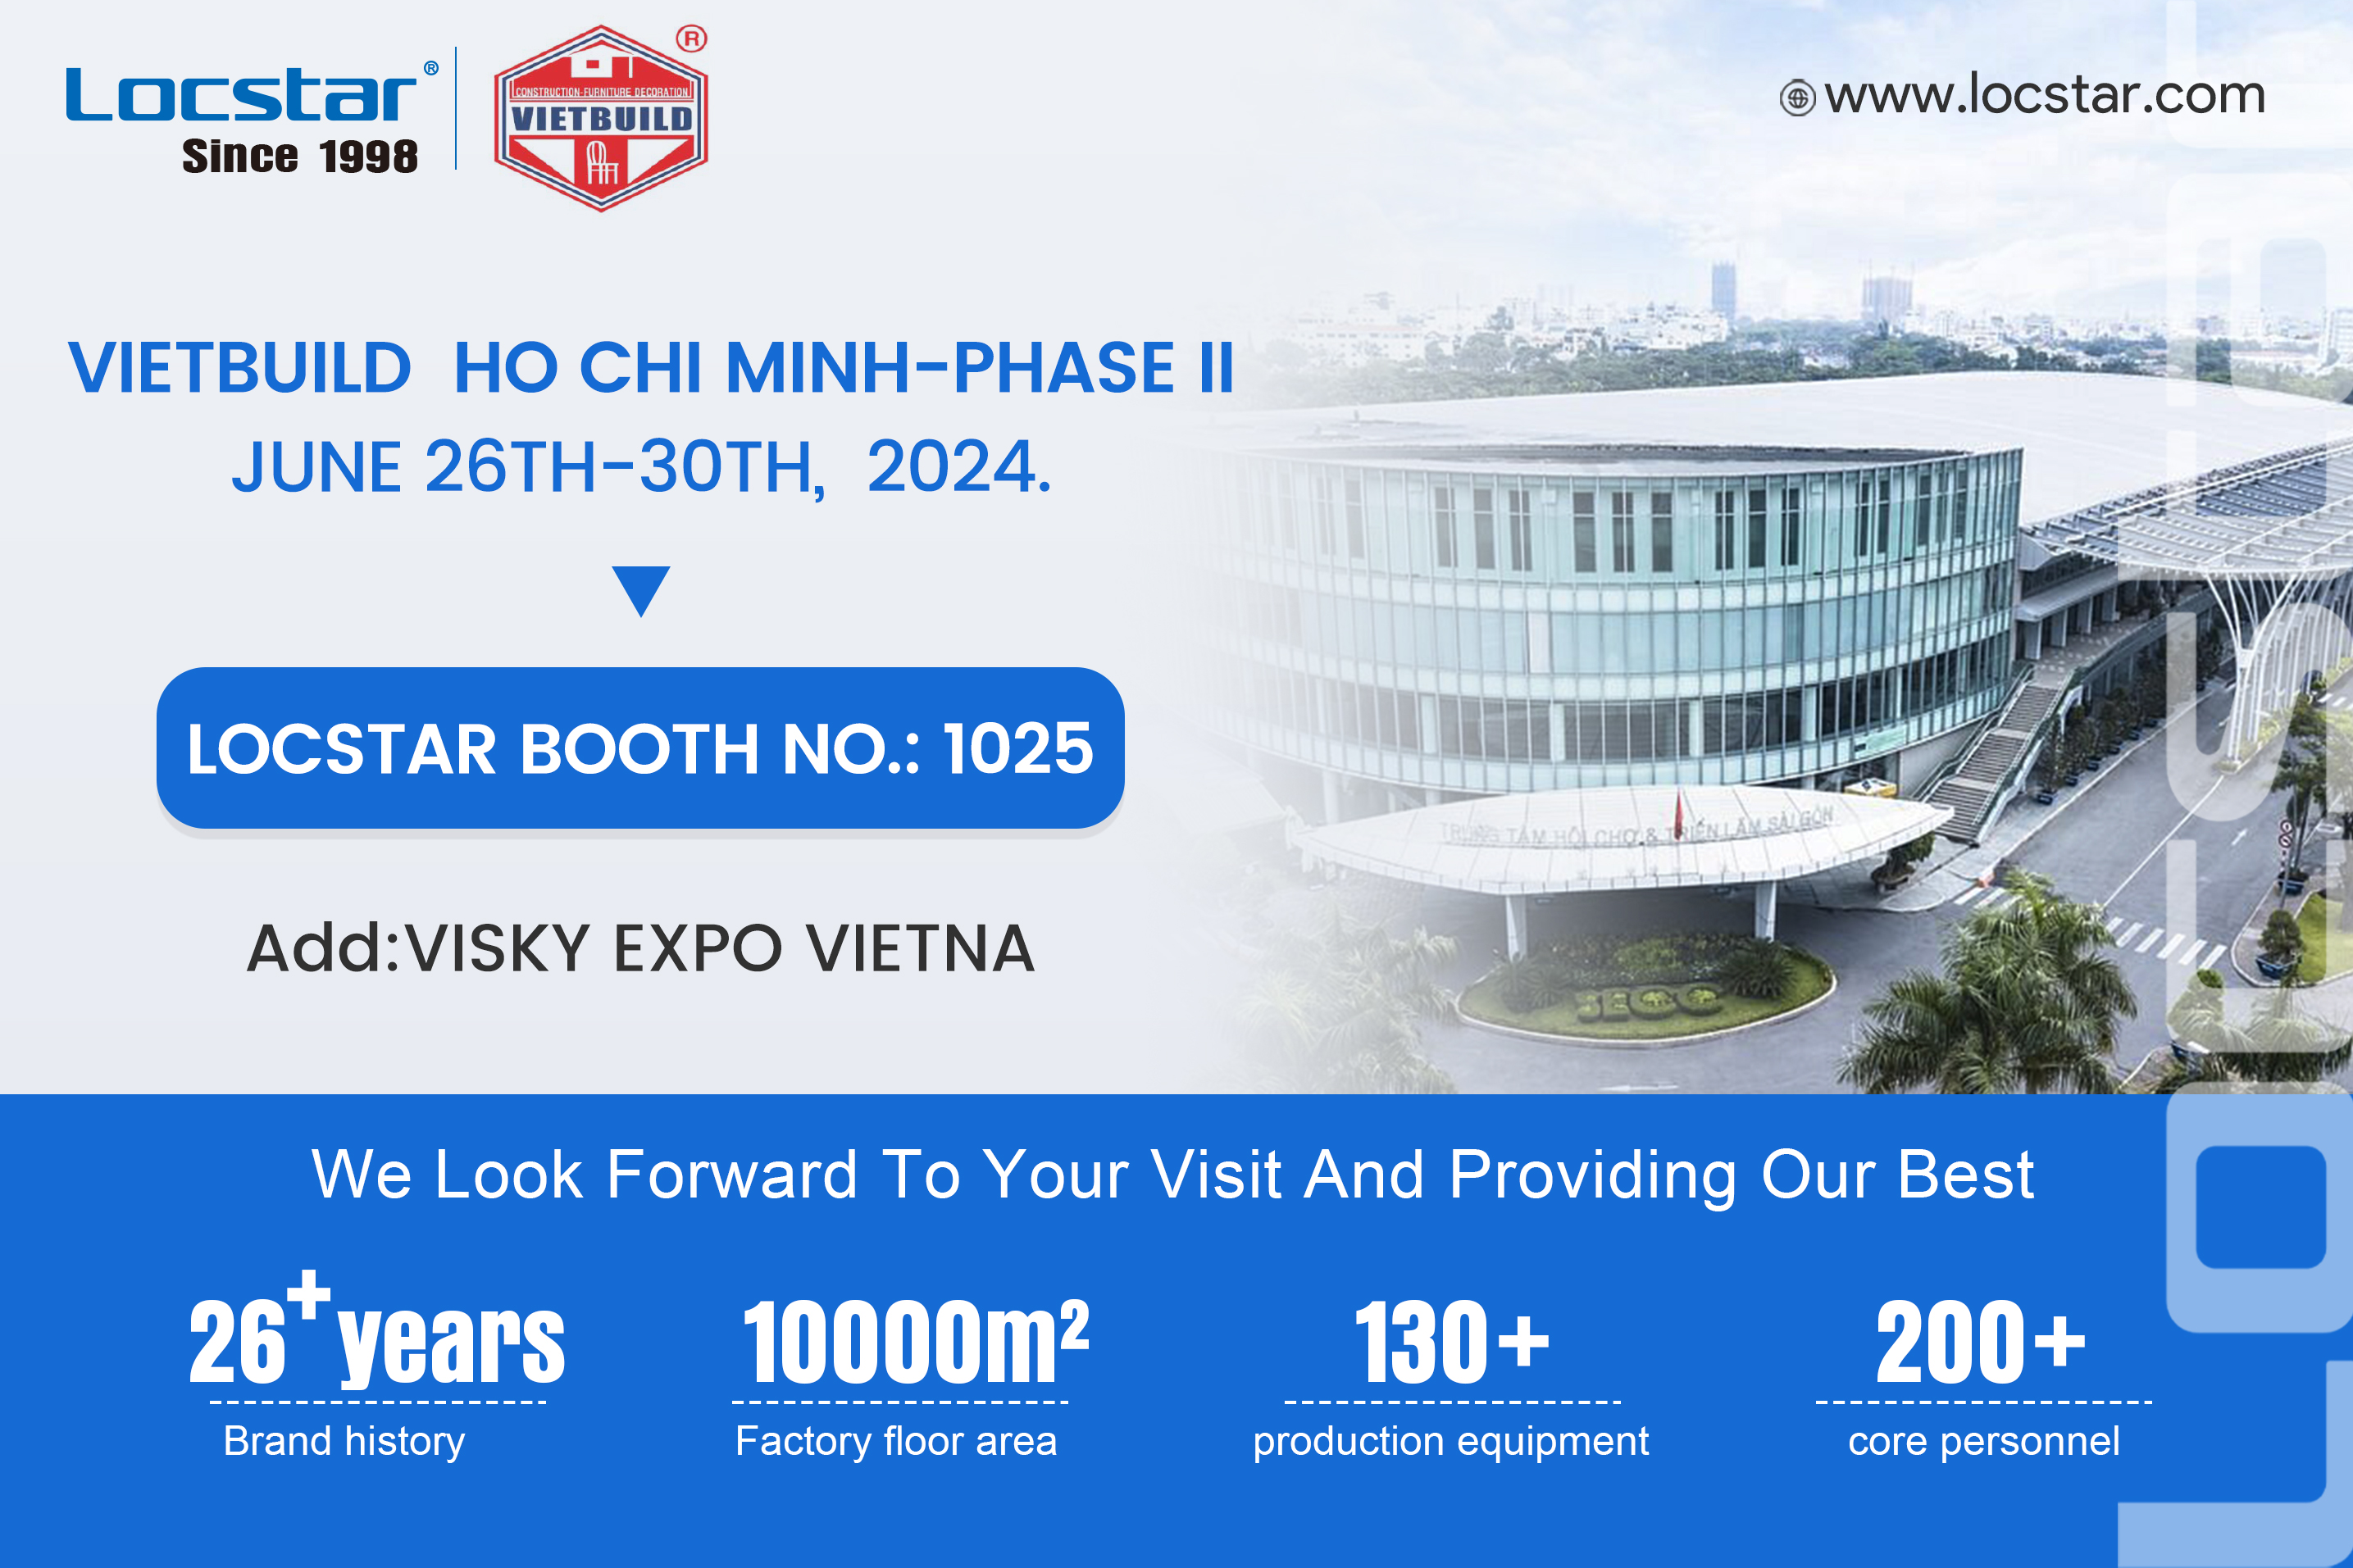 Locstar 2024 Vietnam Exhibition, this time we have brought the latest developed smart lock products, and we sincerely invite you to visit